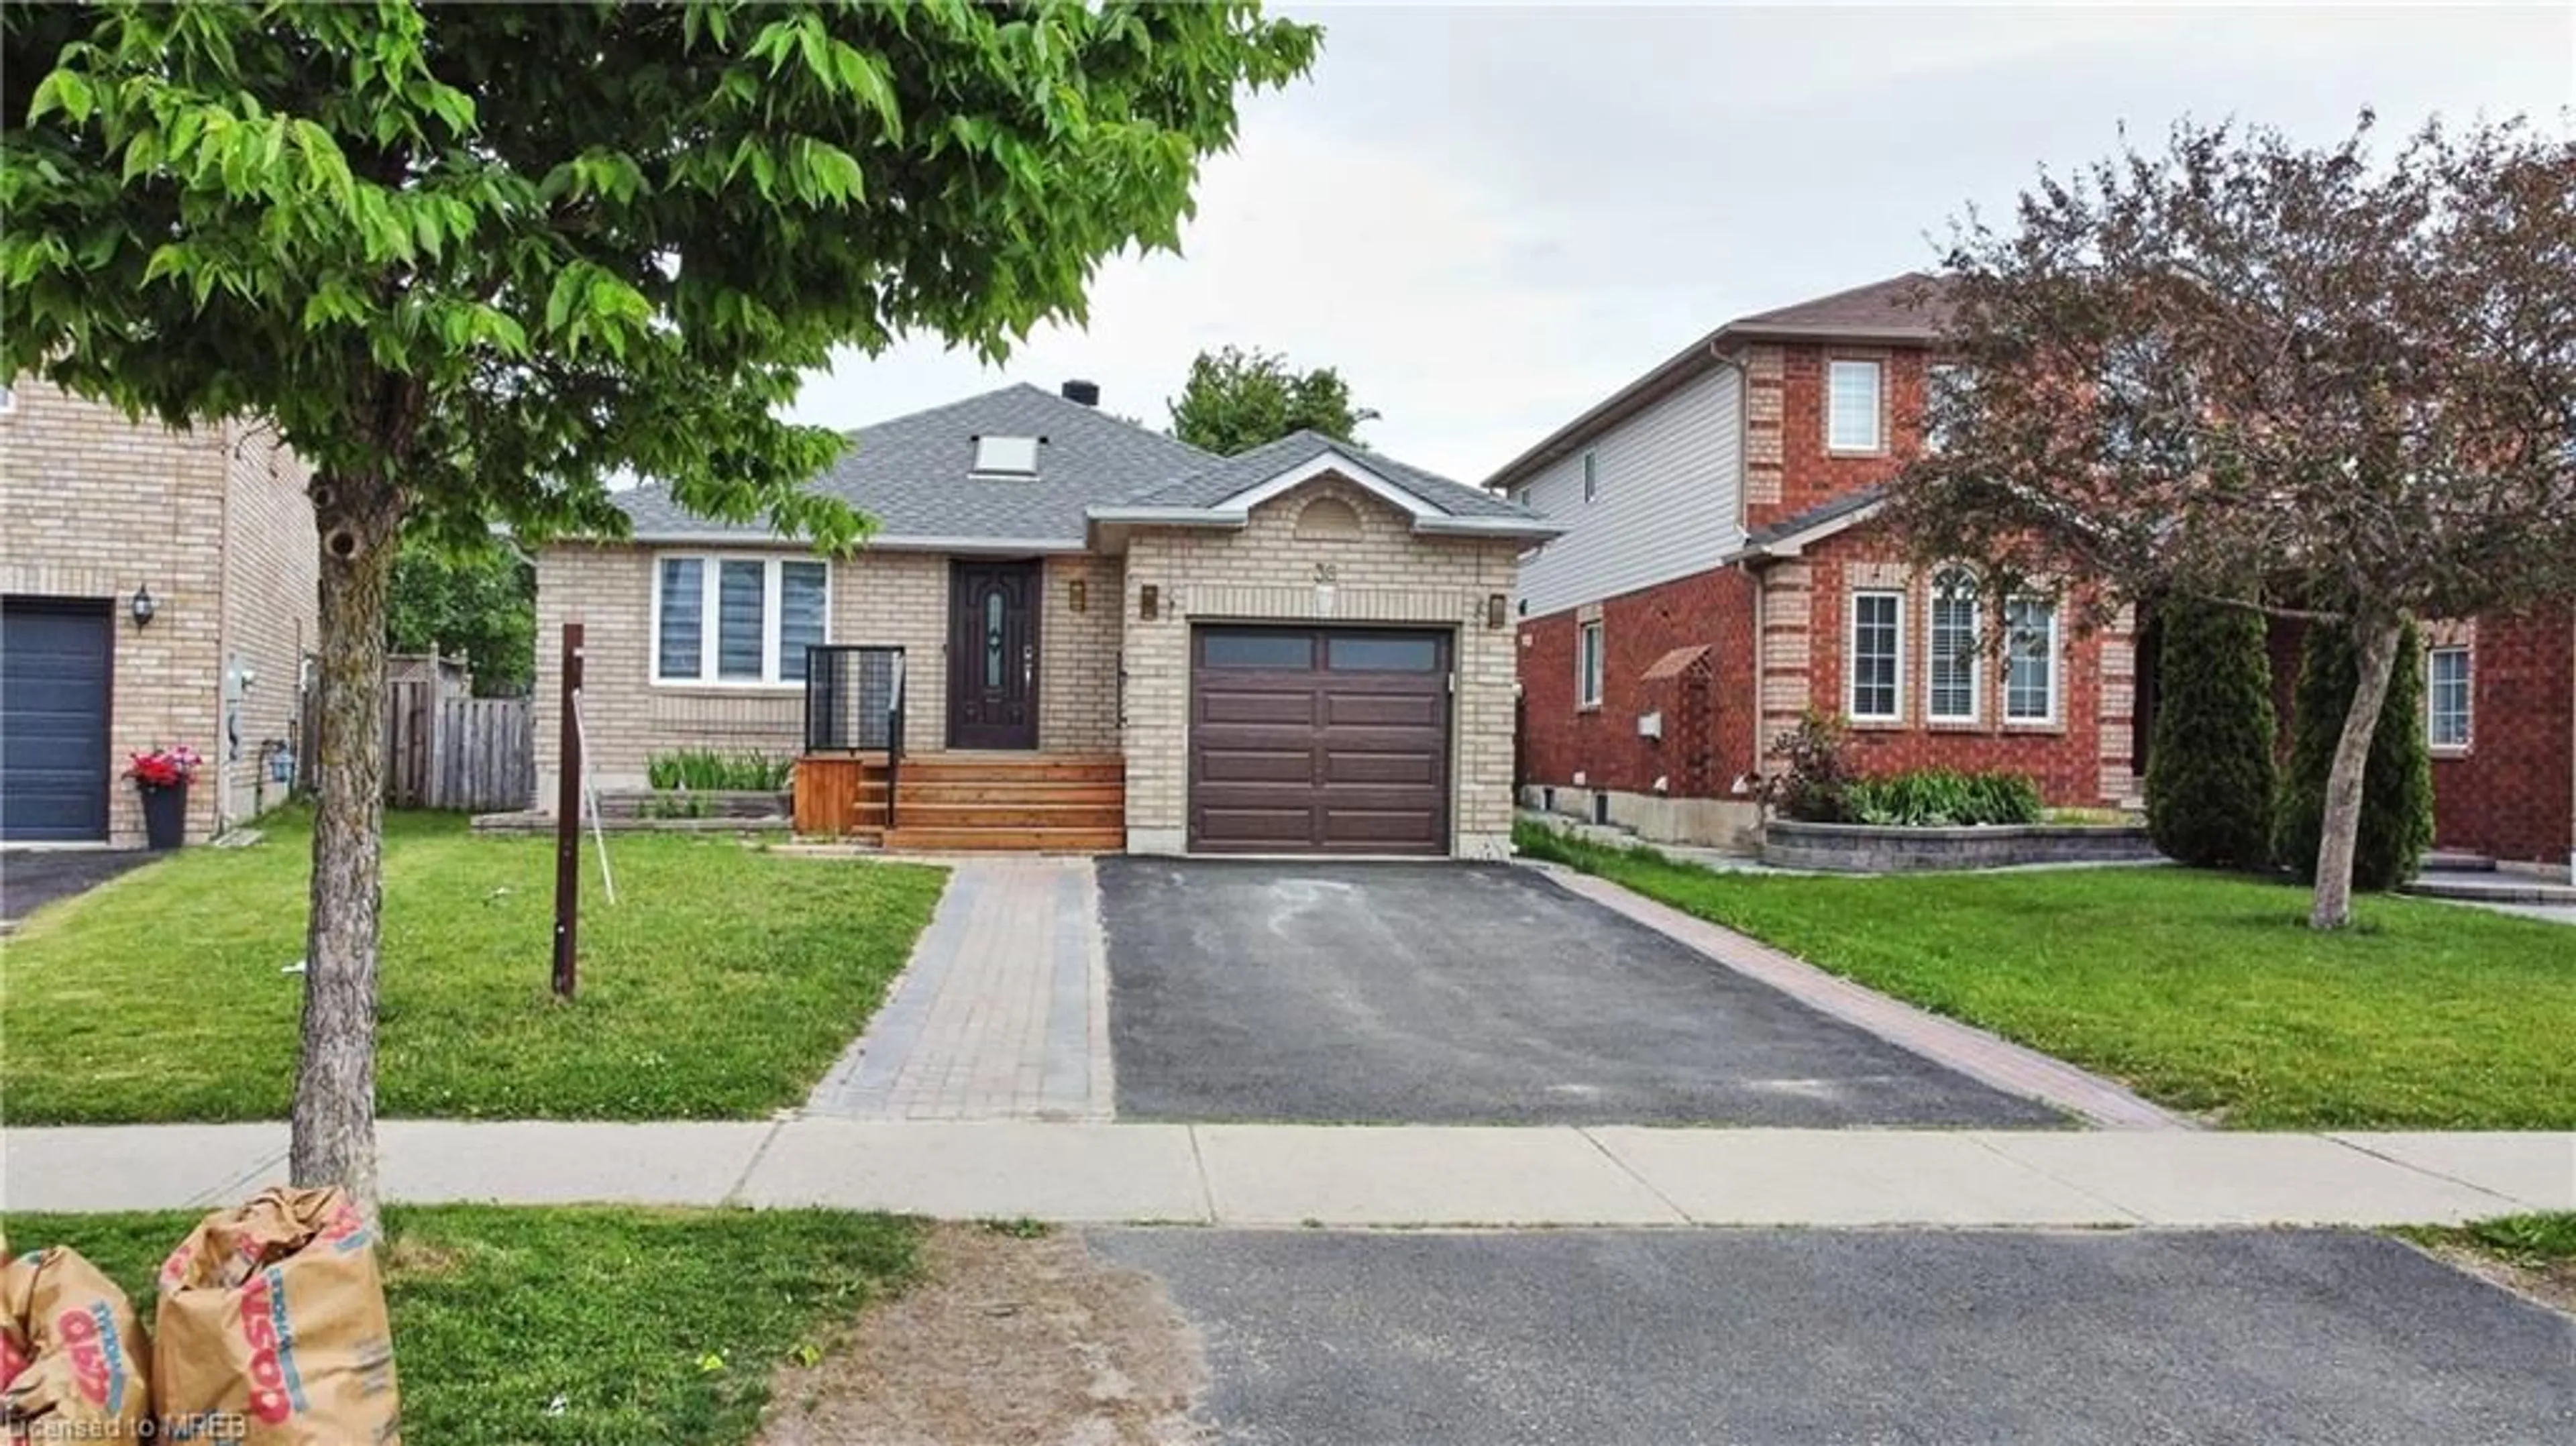 Home with brick exterior material for 38 Ambler Bay, Barrie Ontario L4M 7A5